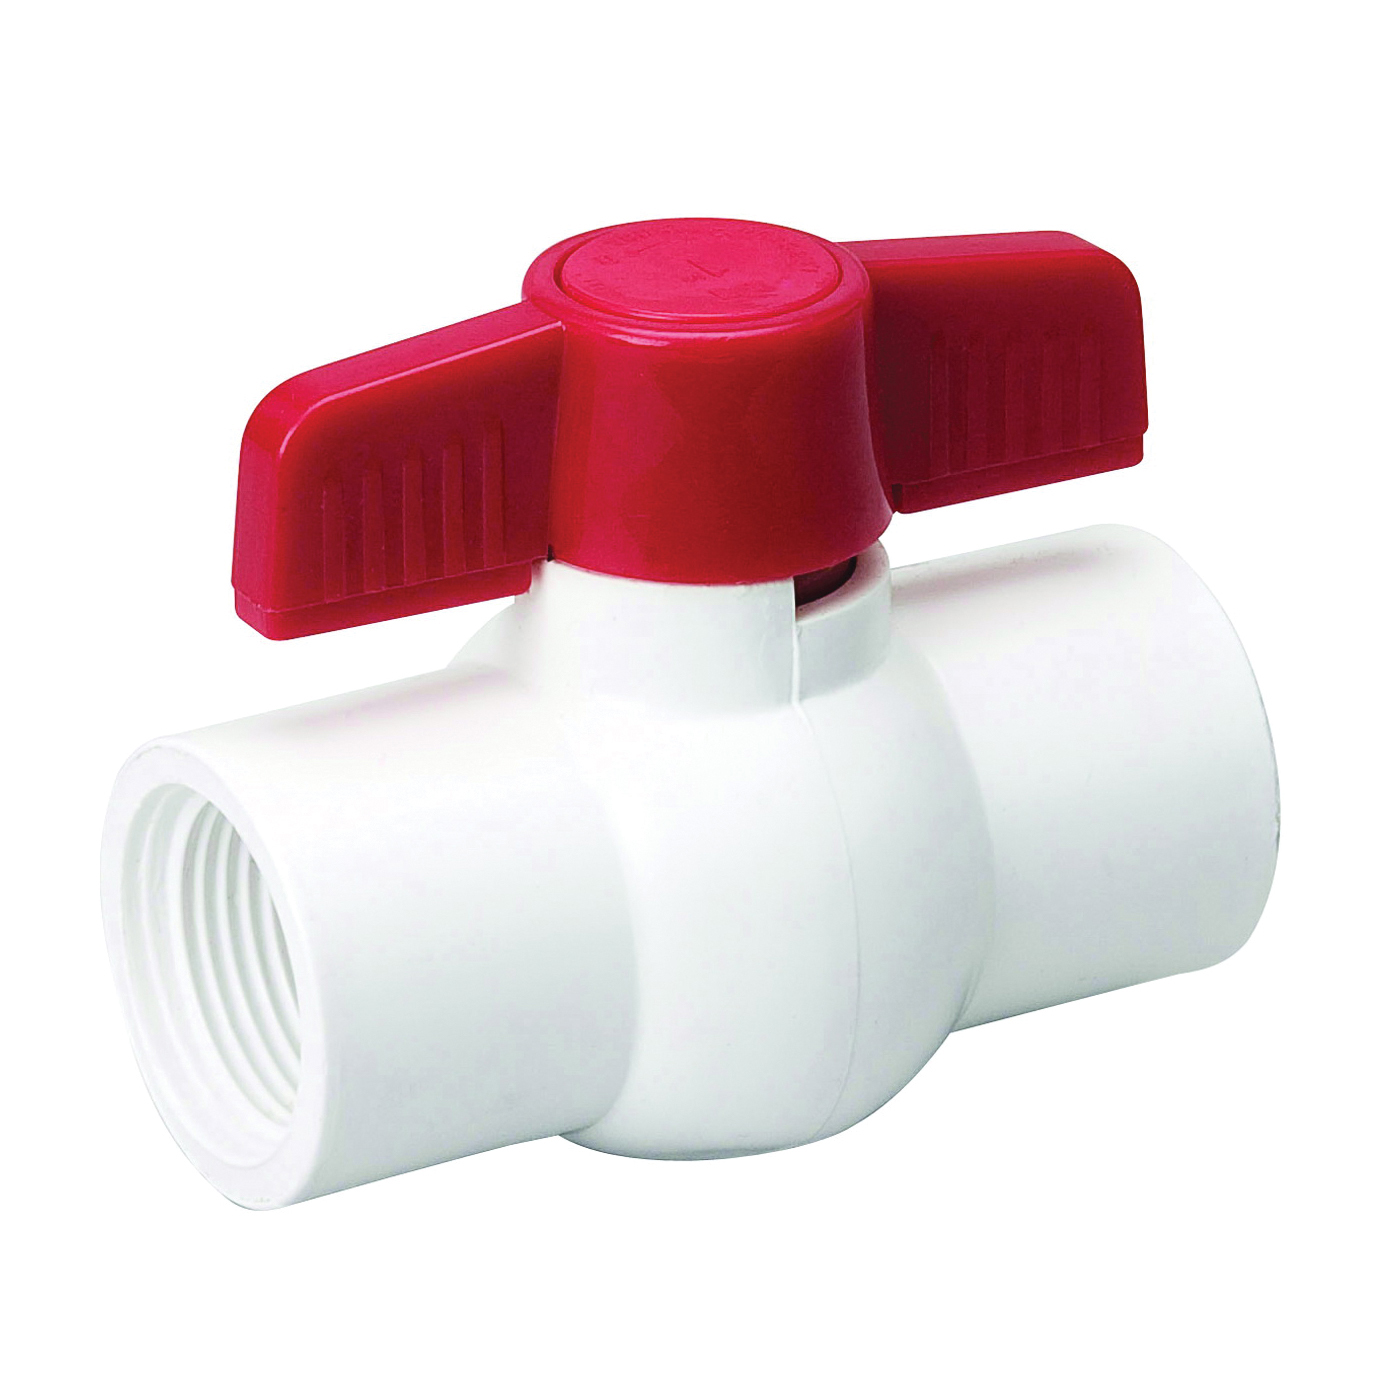 107-137HC Ball Valve, 1-1/2 in Connection, FPT x FPT, 150 psi Pressure, PVC Body